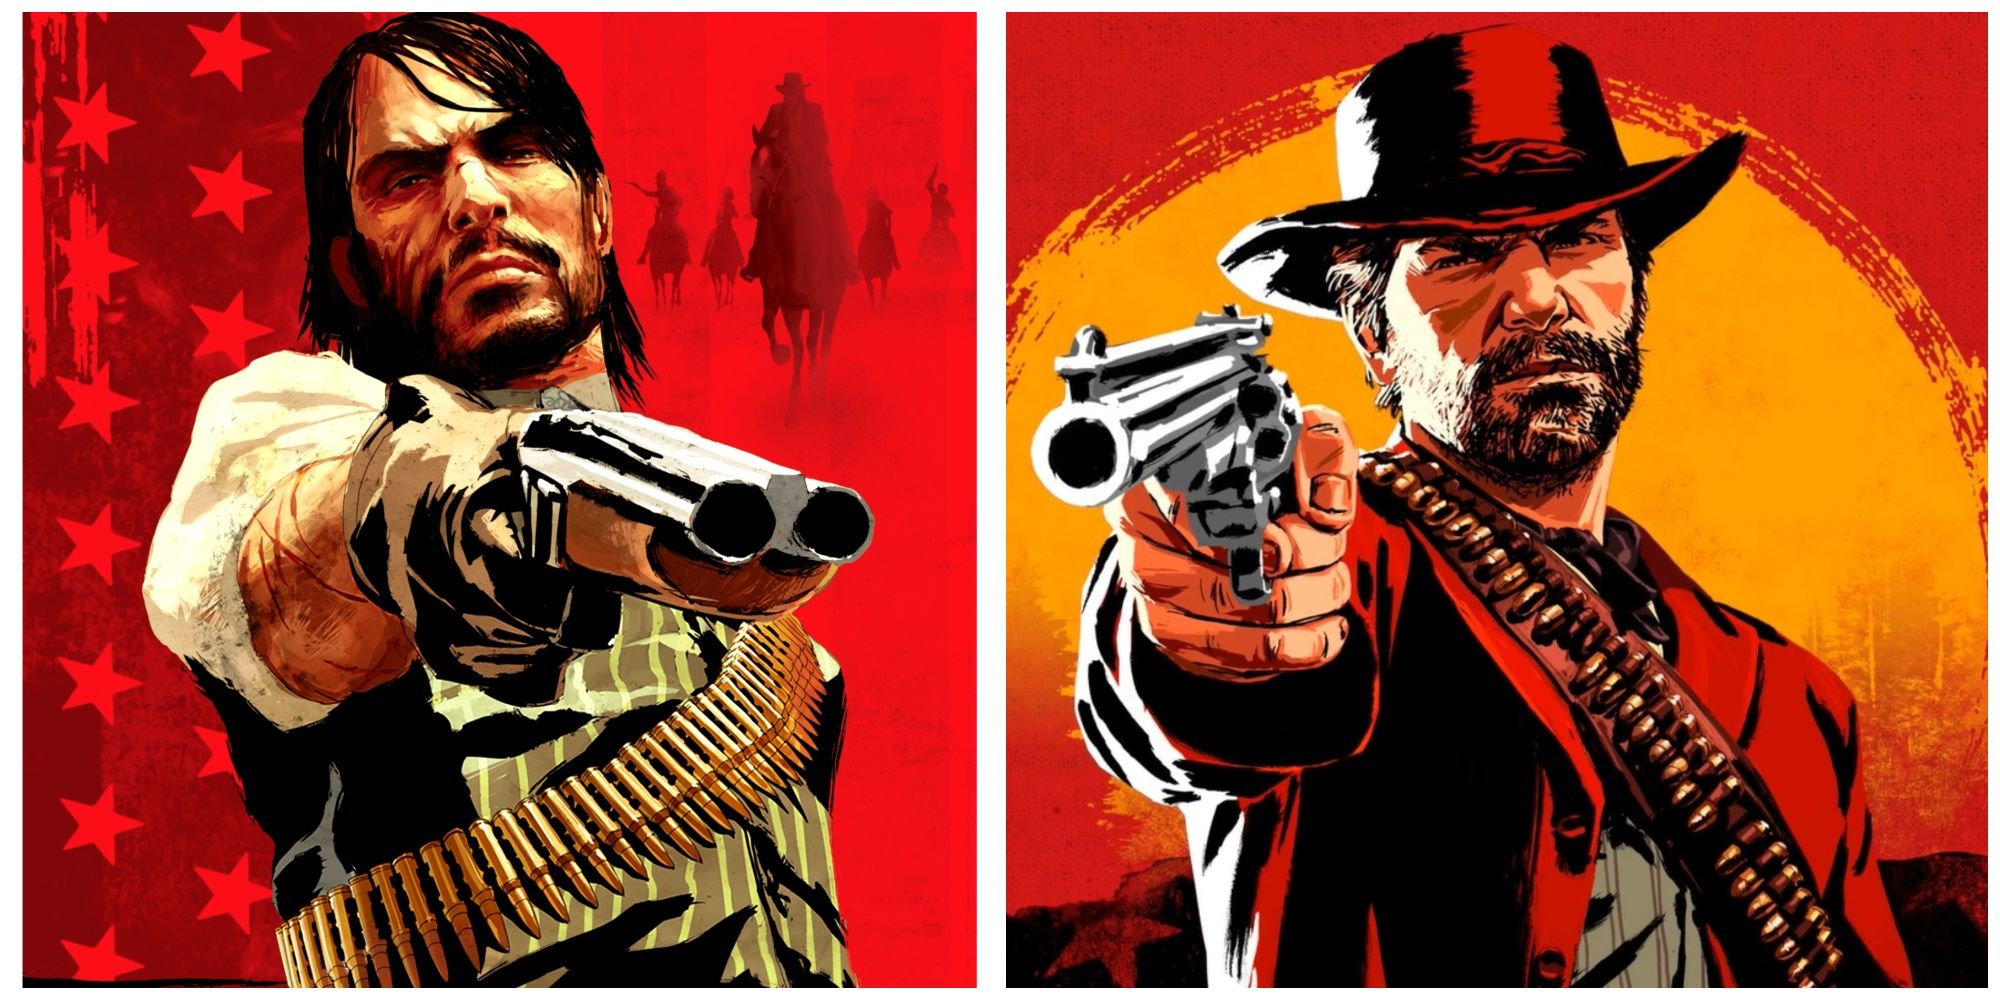 You might be playing the Red Dead Redemption remake before Starfield